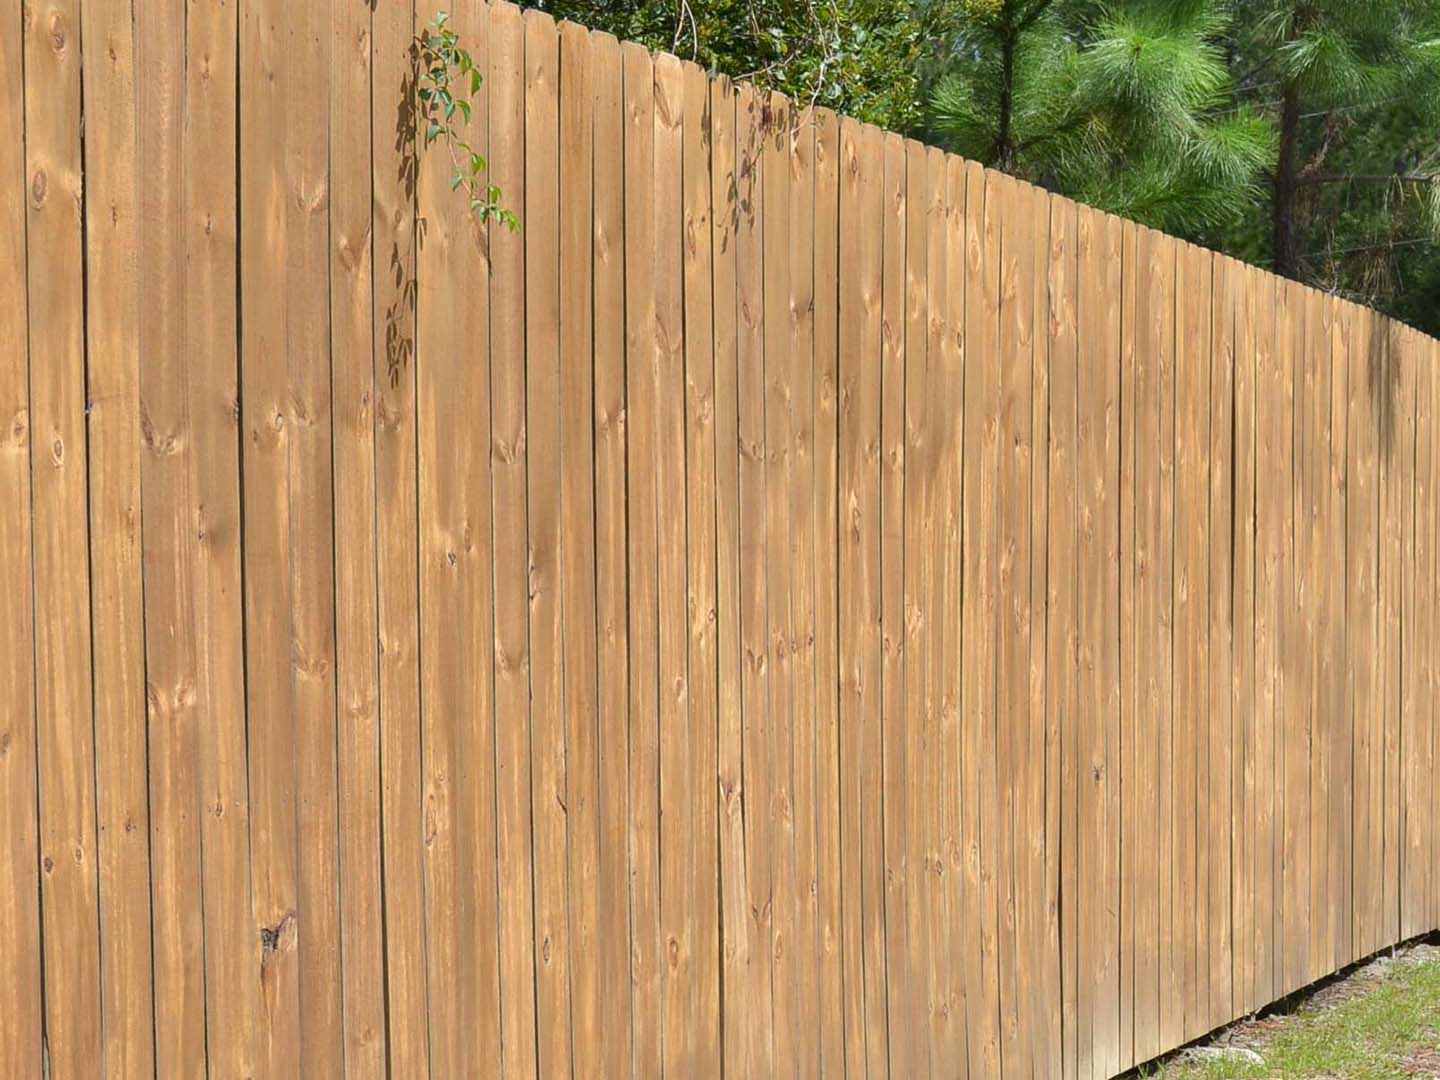 Pre-Stained Commercial Wood Stockade Fence Installation Service in Savannah, Georgia